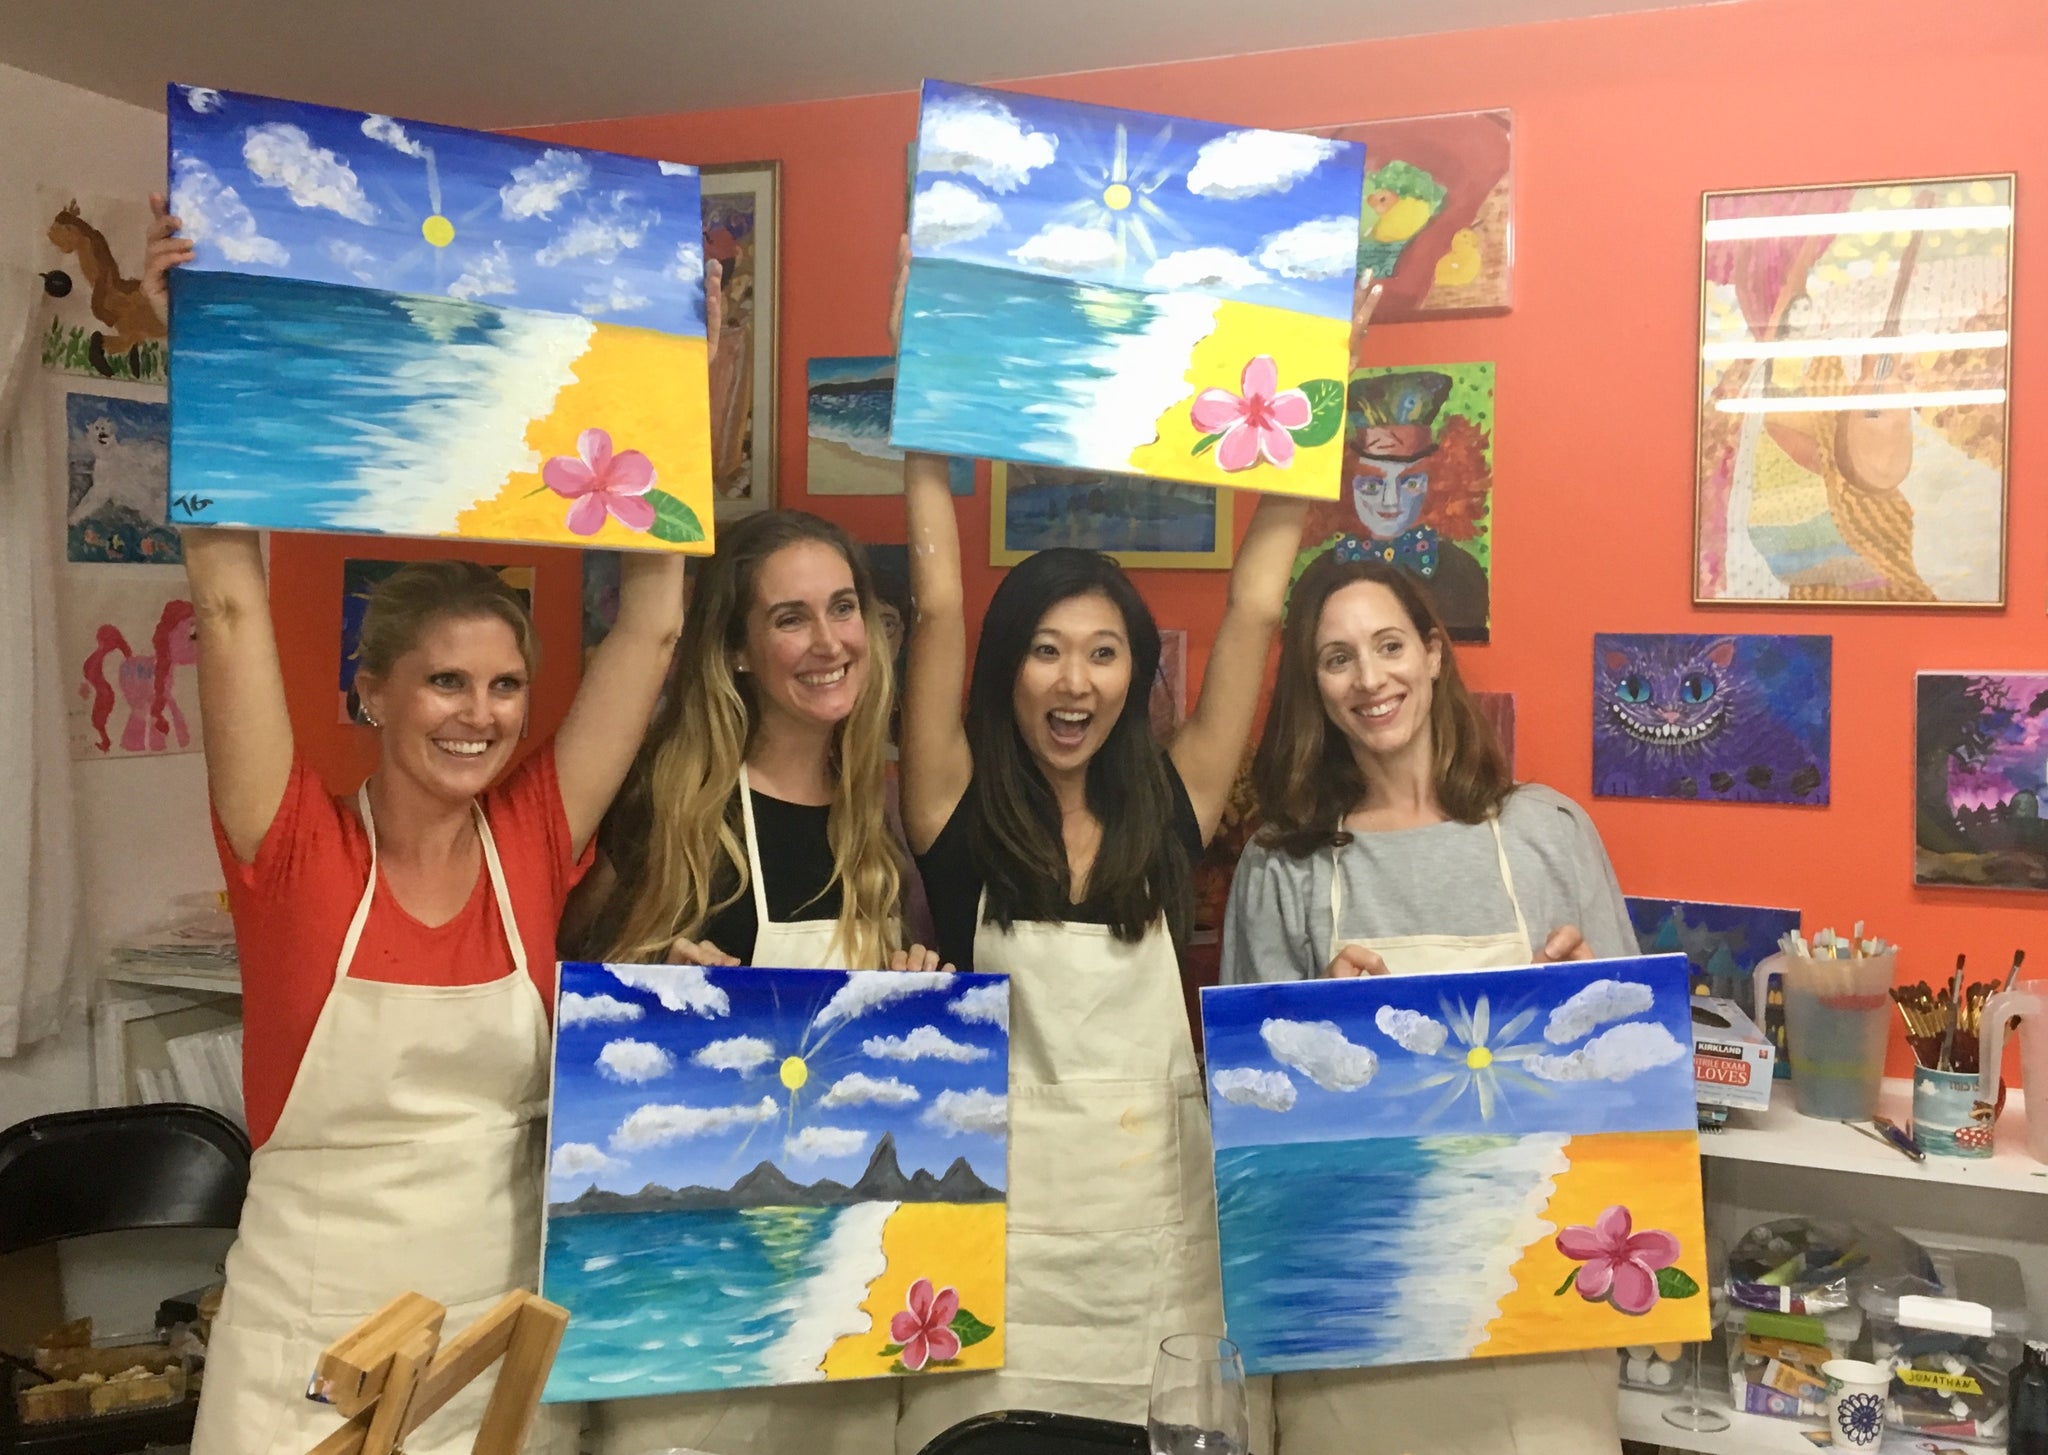 7 Paint Party Ideas: From Paint and Sip to Fundraising Events